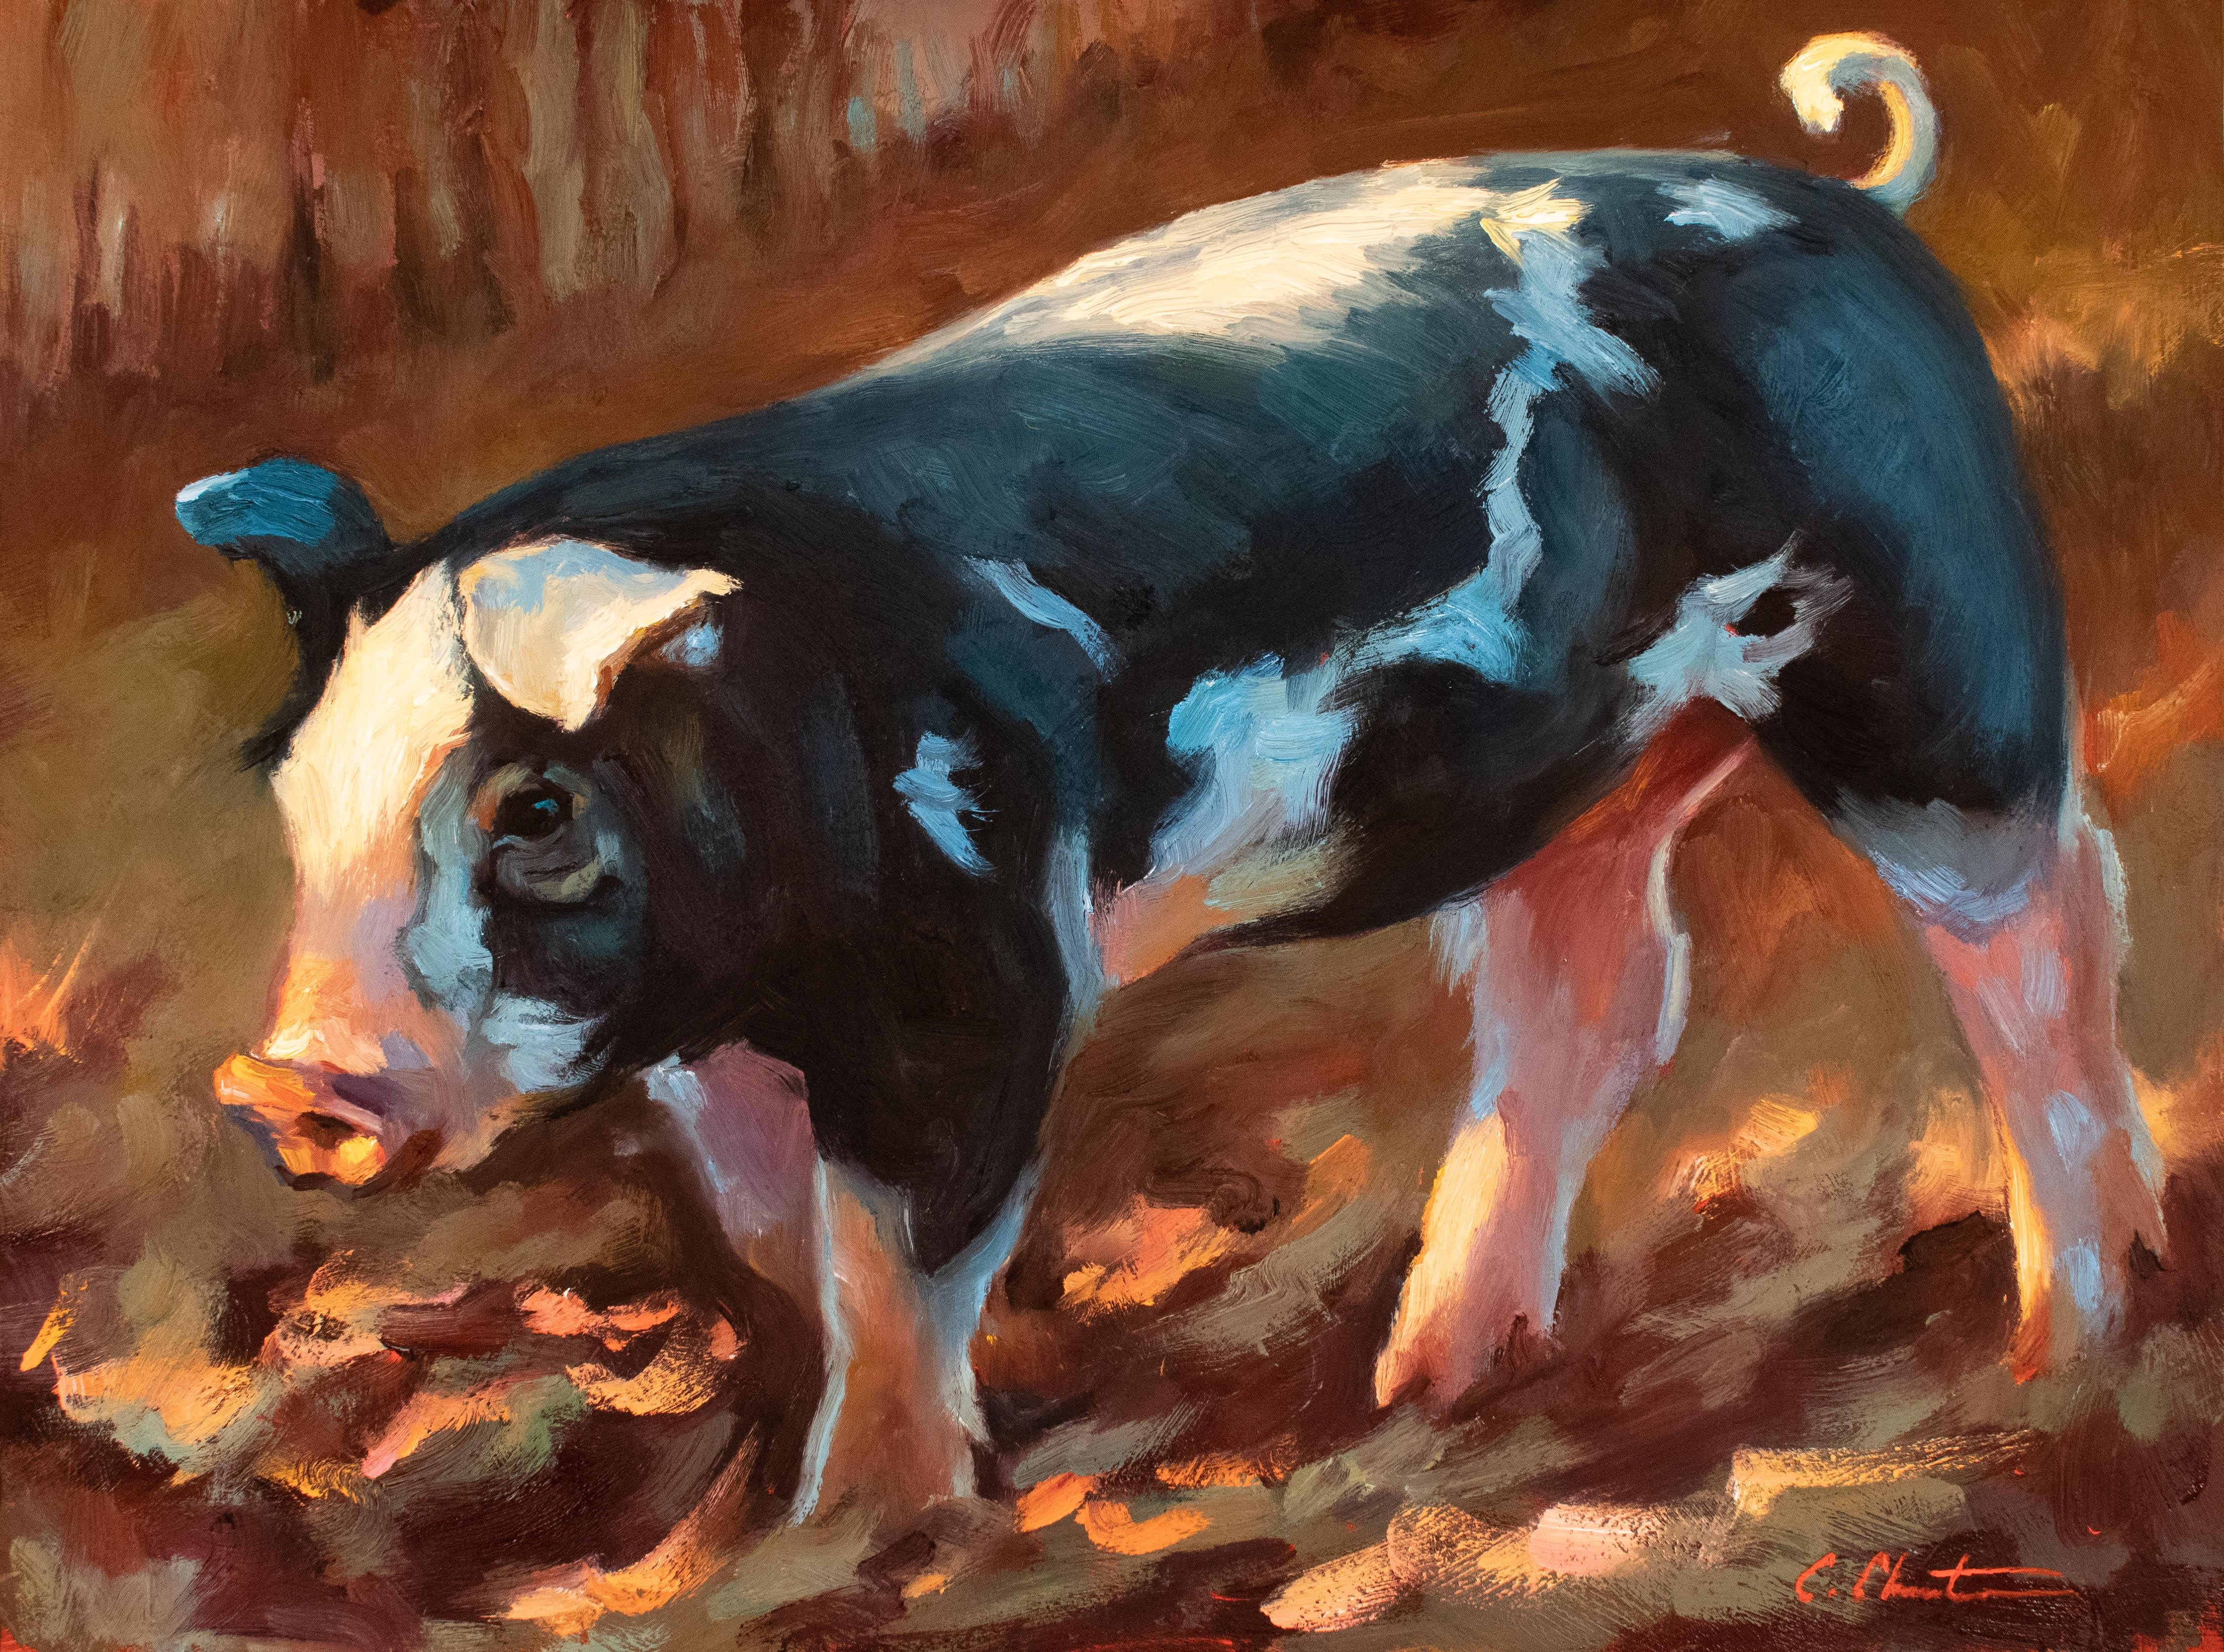 Cheri Christensen Animal Painting - "Piggy" impressionist style oil painting of a black and white piglet